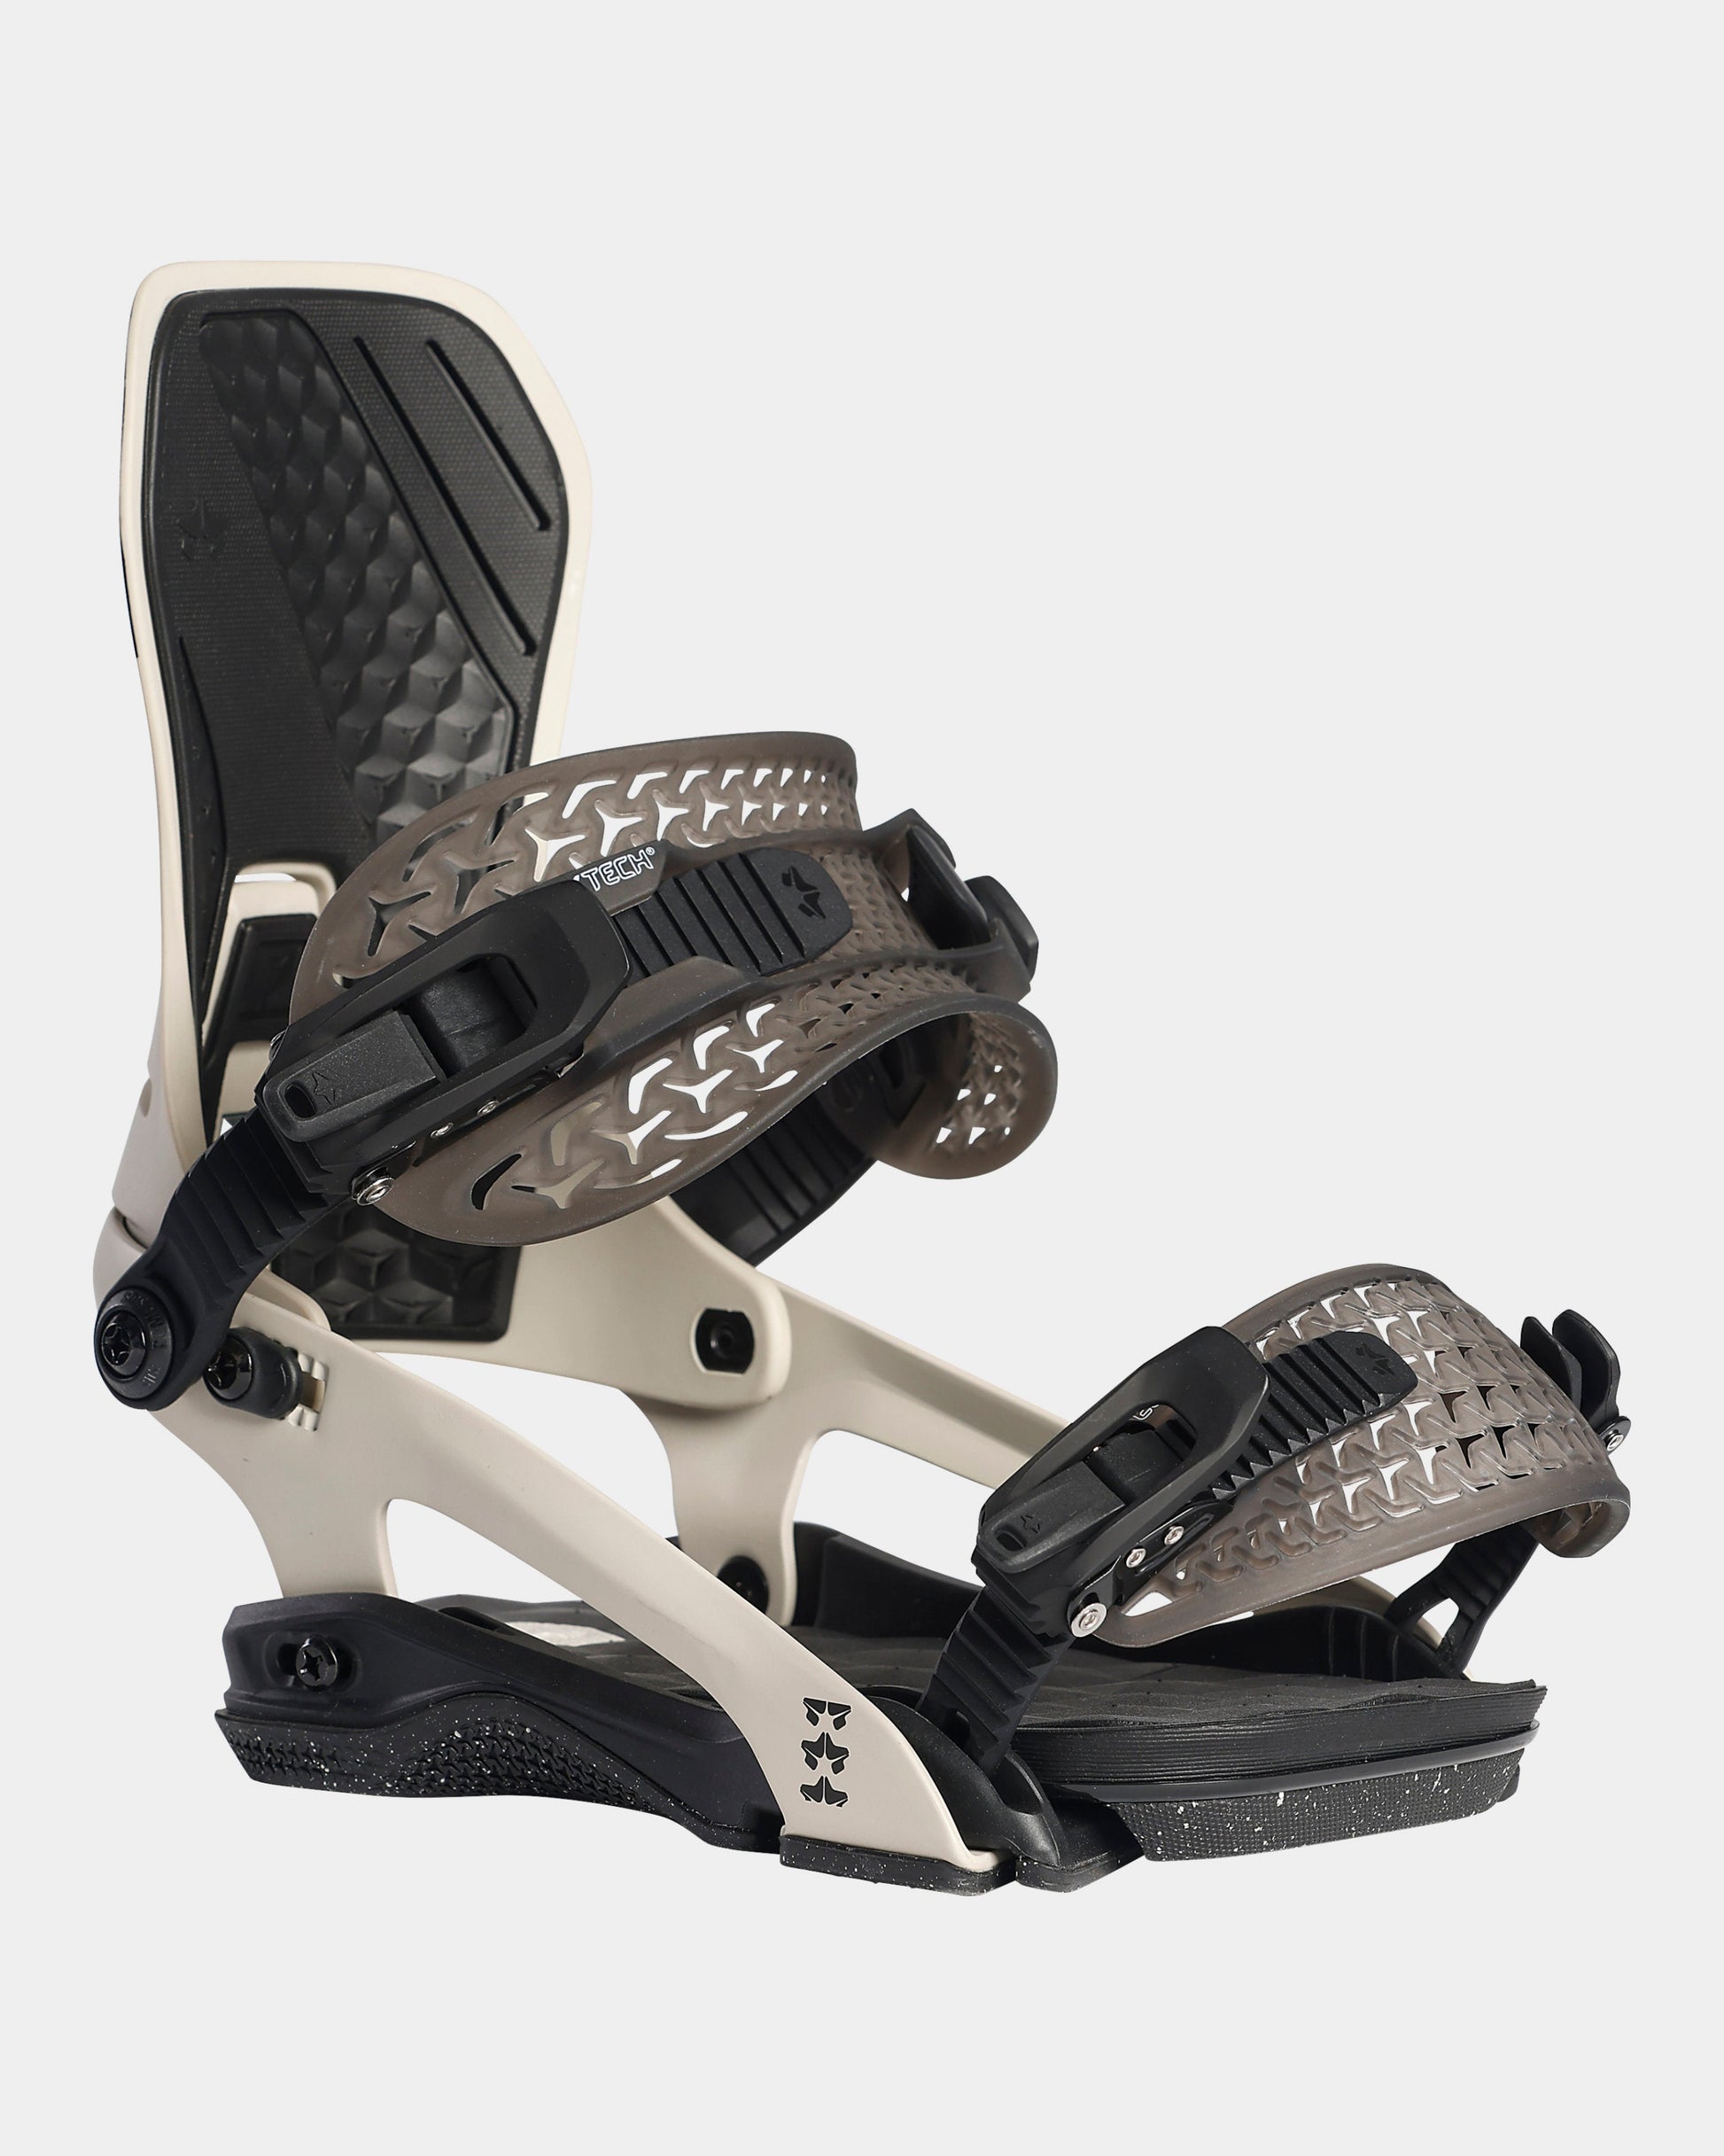 Rome dod bindings 2022 mens snowboard bindings product photo from the side cover shot in the studio color bone white